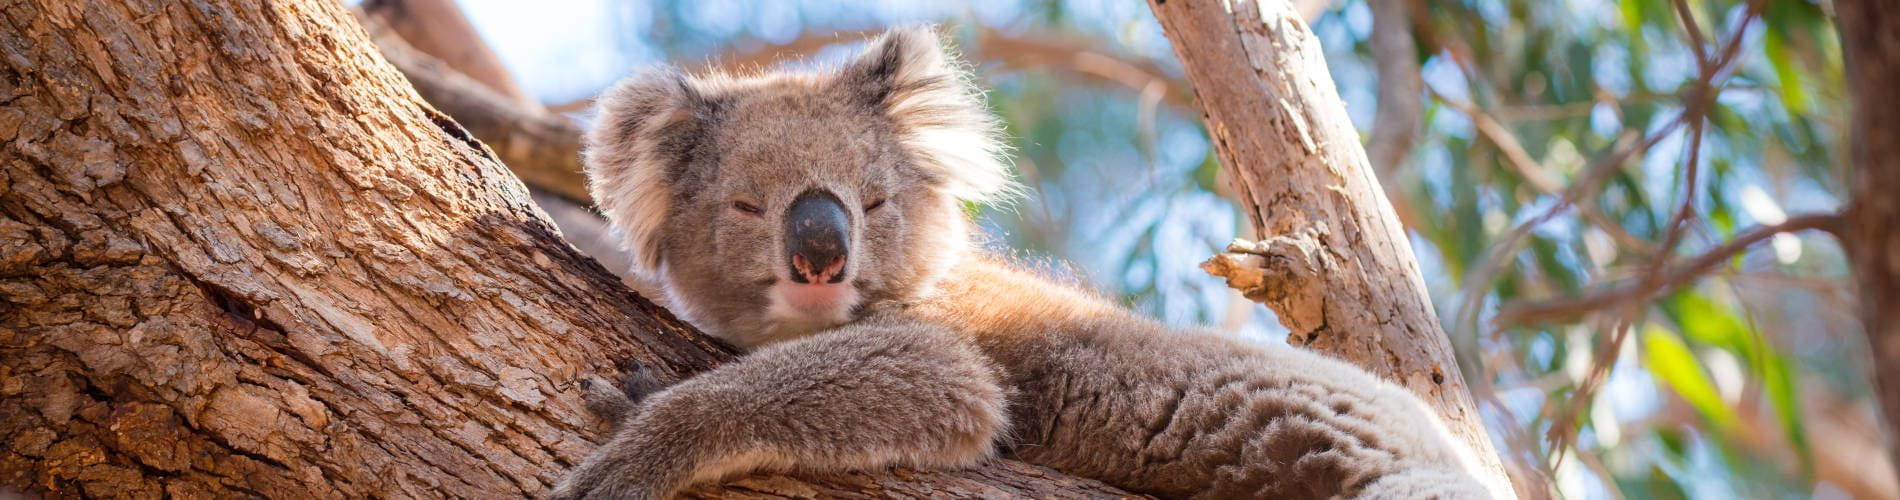 New tool helps scientists, veterinarians shed light on koala chlamydia infections